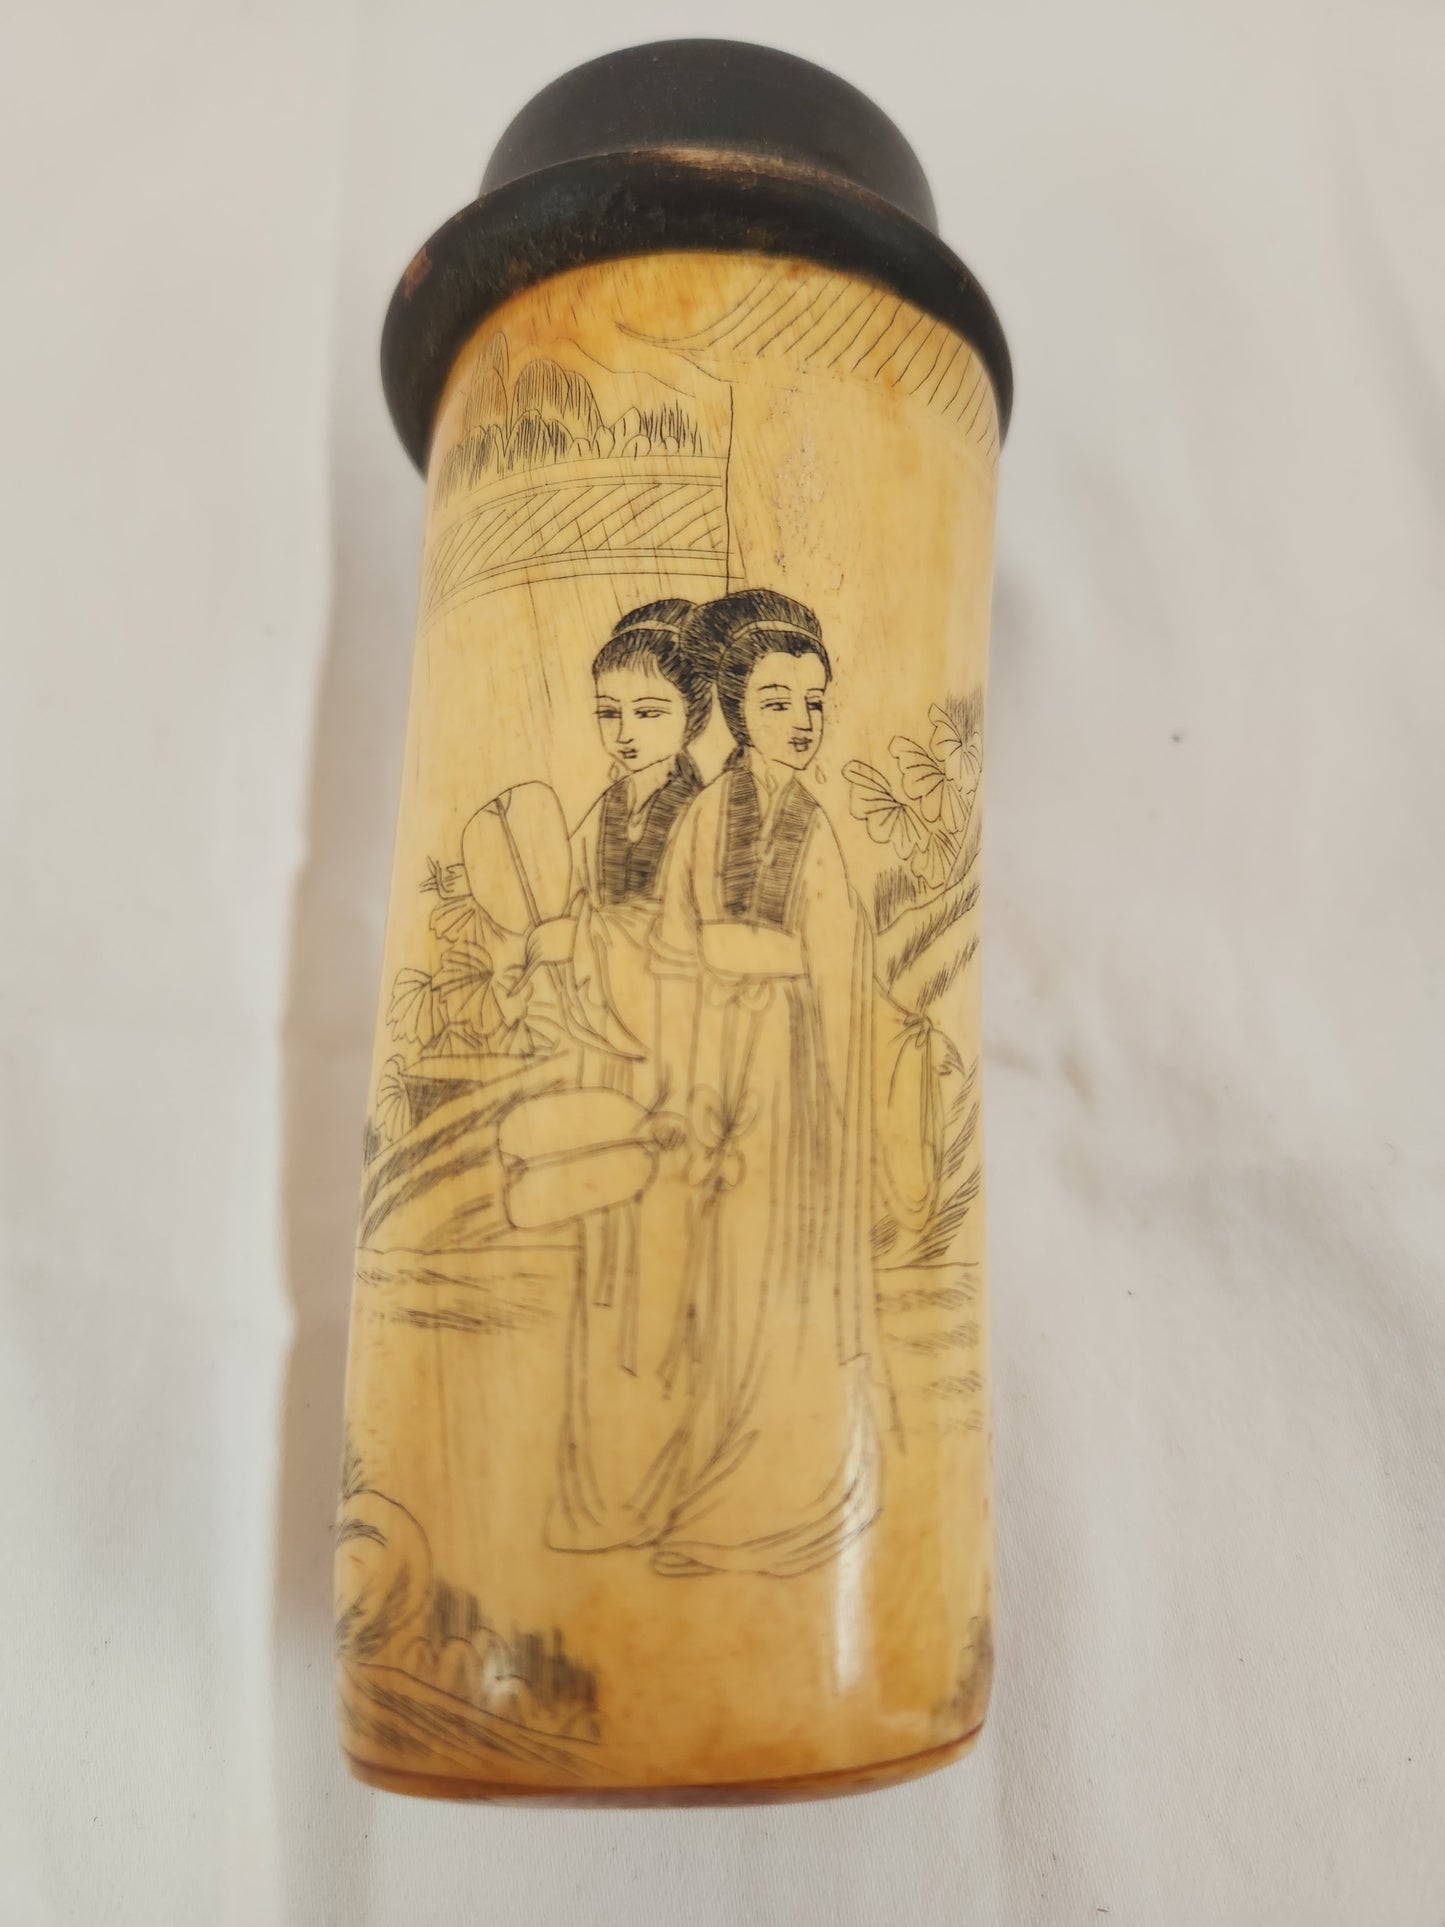 Antique Chinese Bone Scrimshaw Cricket Cage - 5" Tall